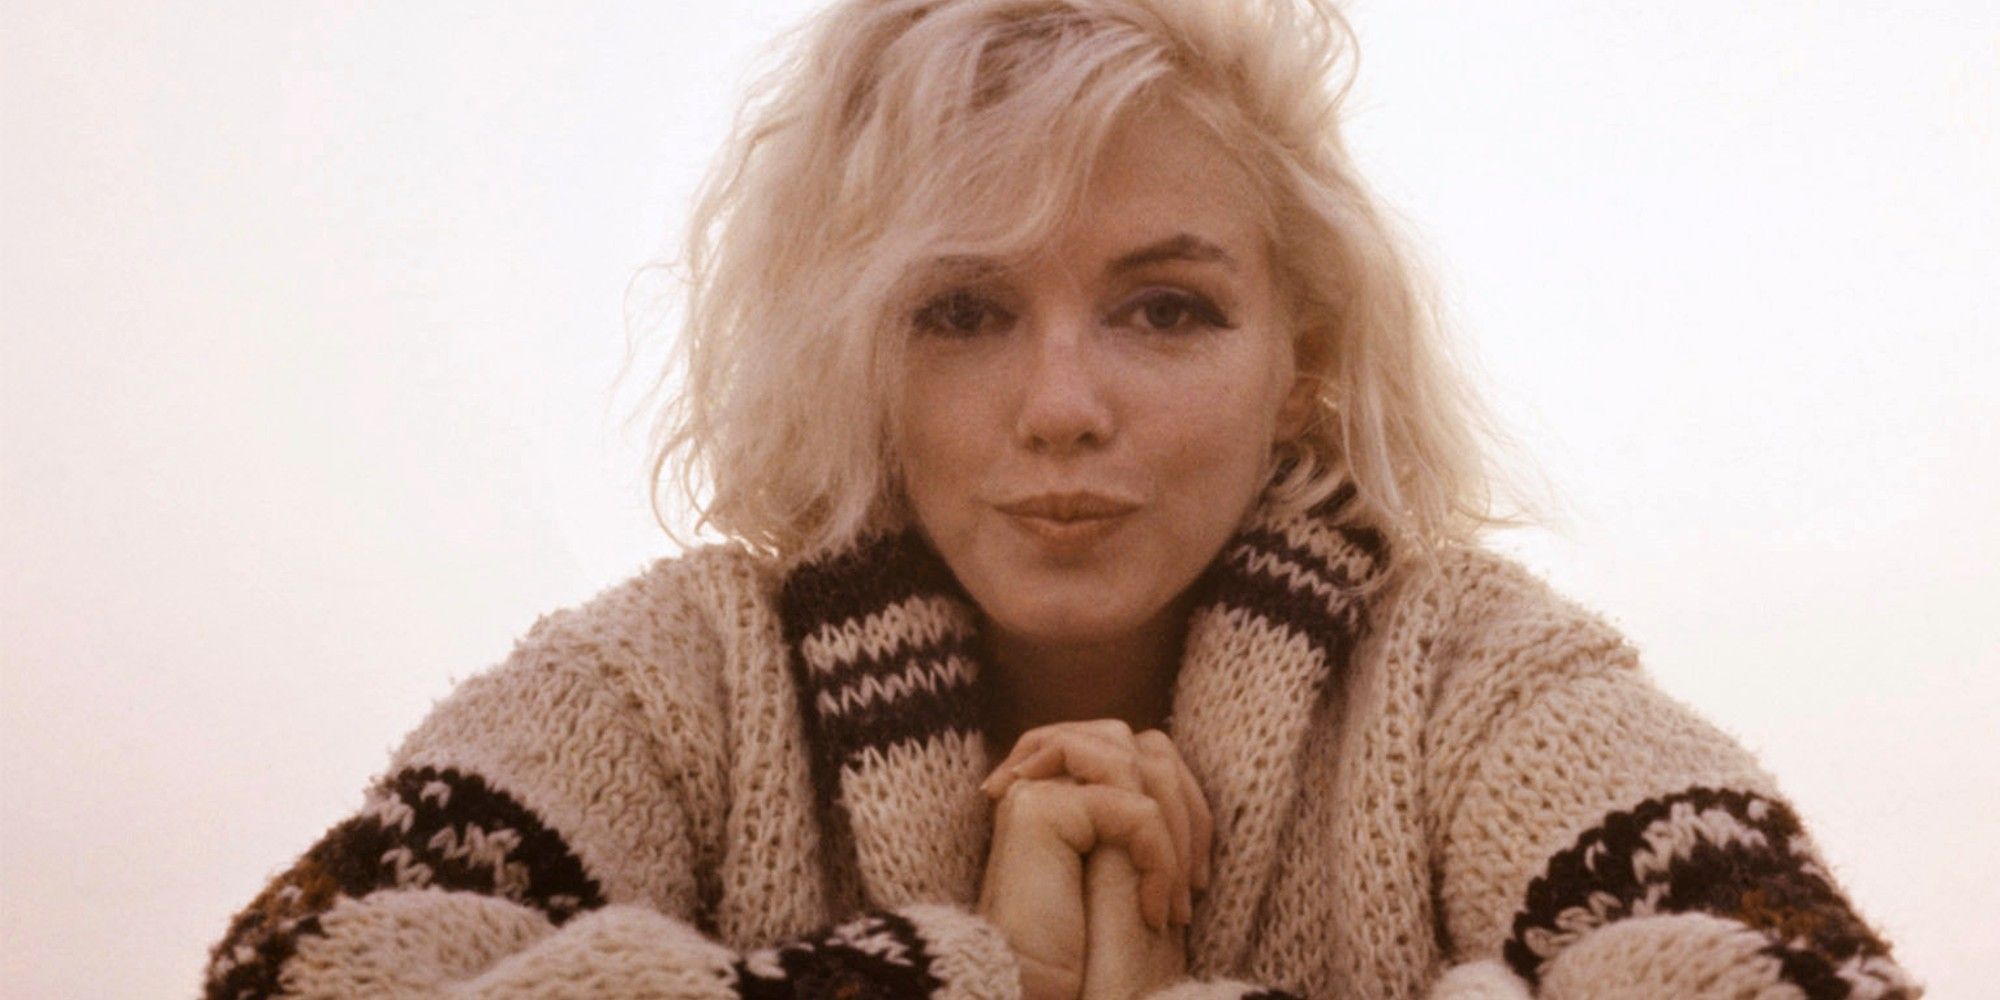 Did Marilyn Monroe Have an IQ of 168?